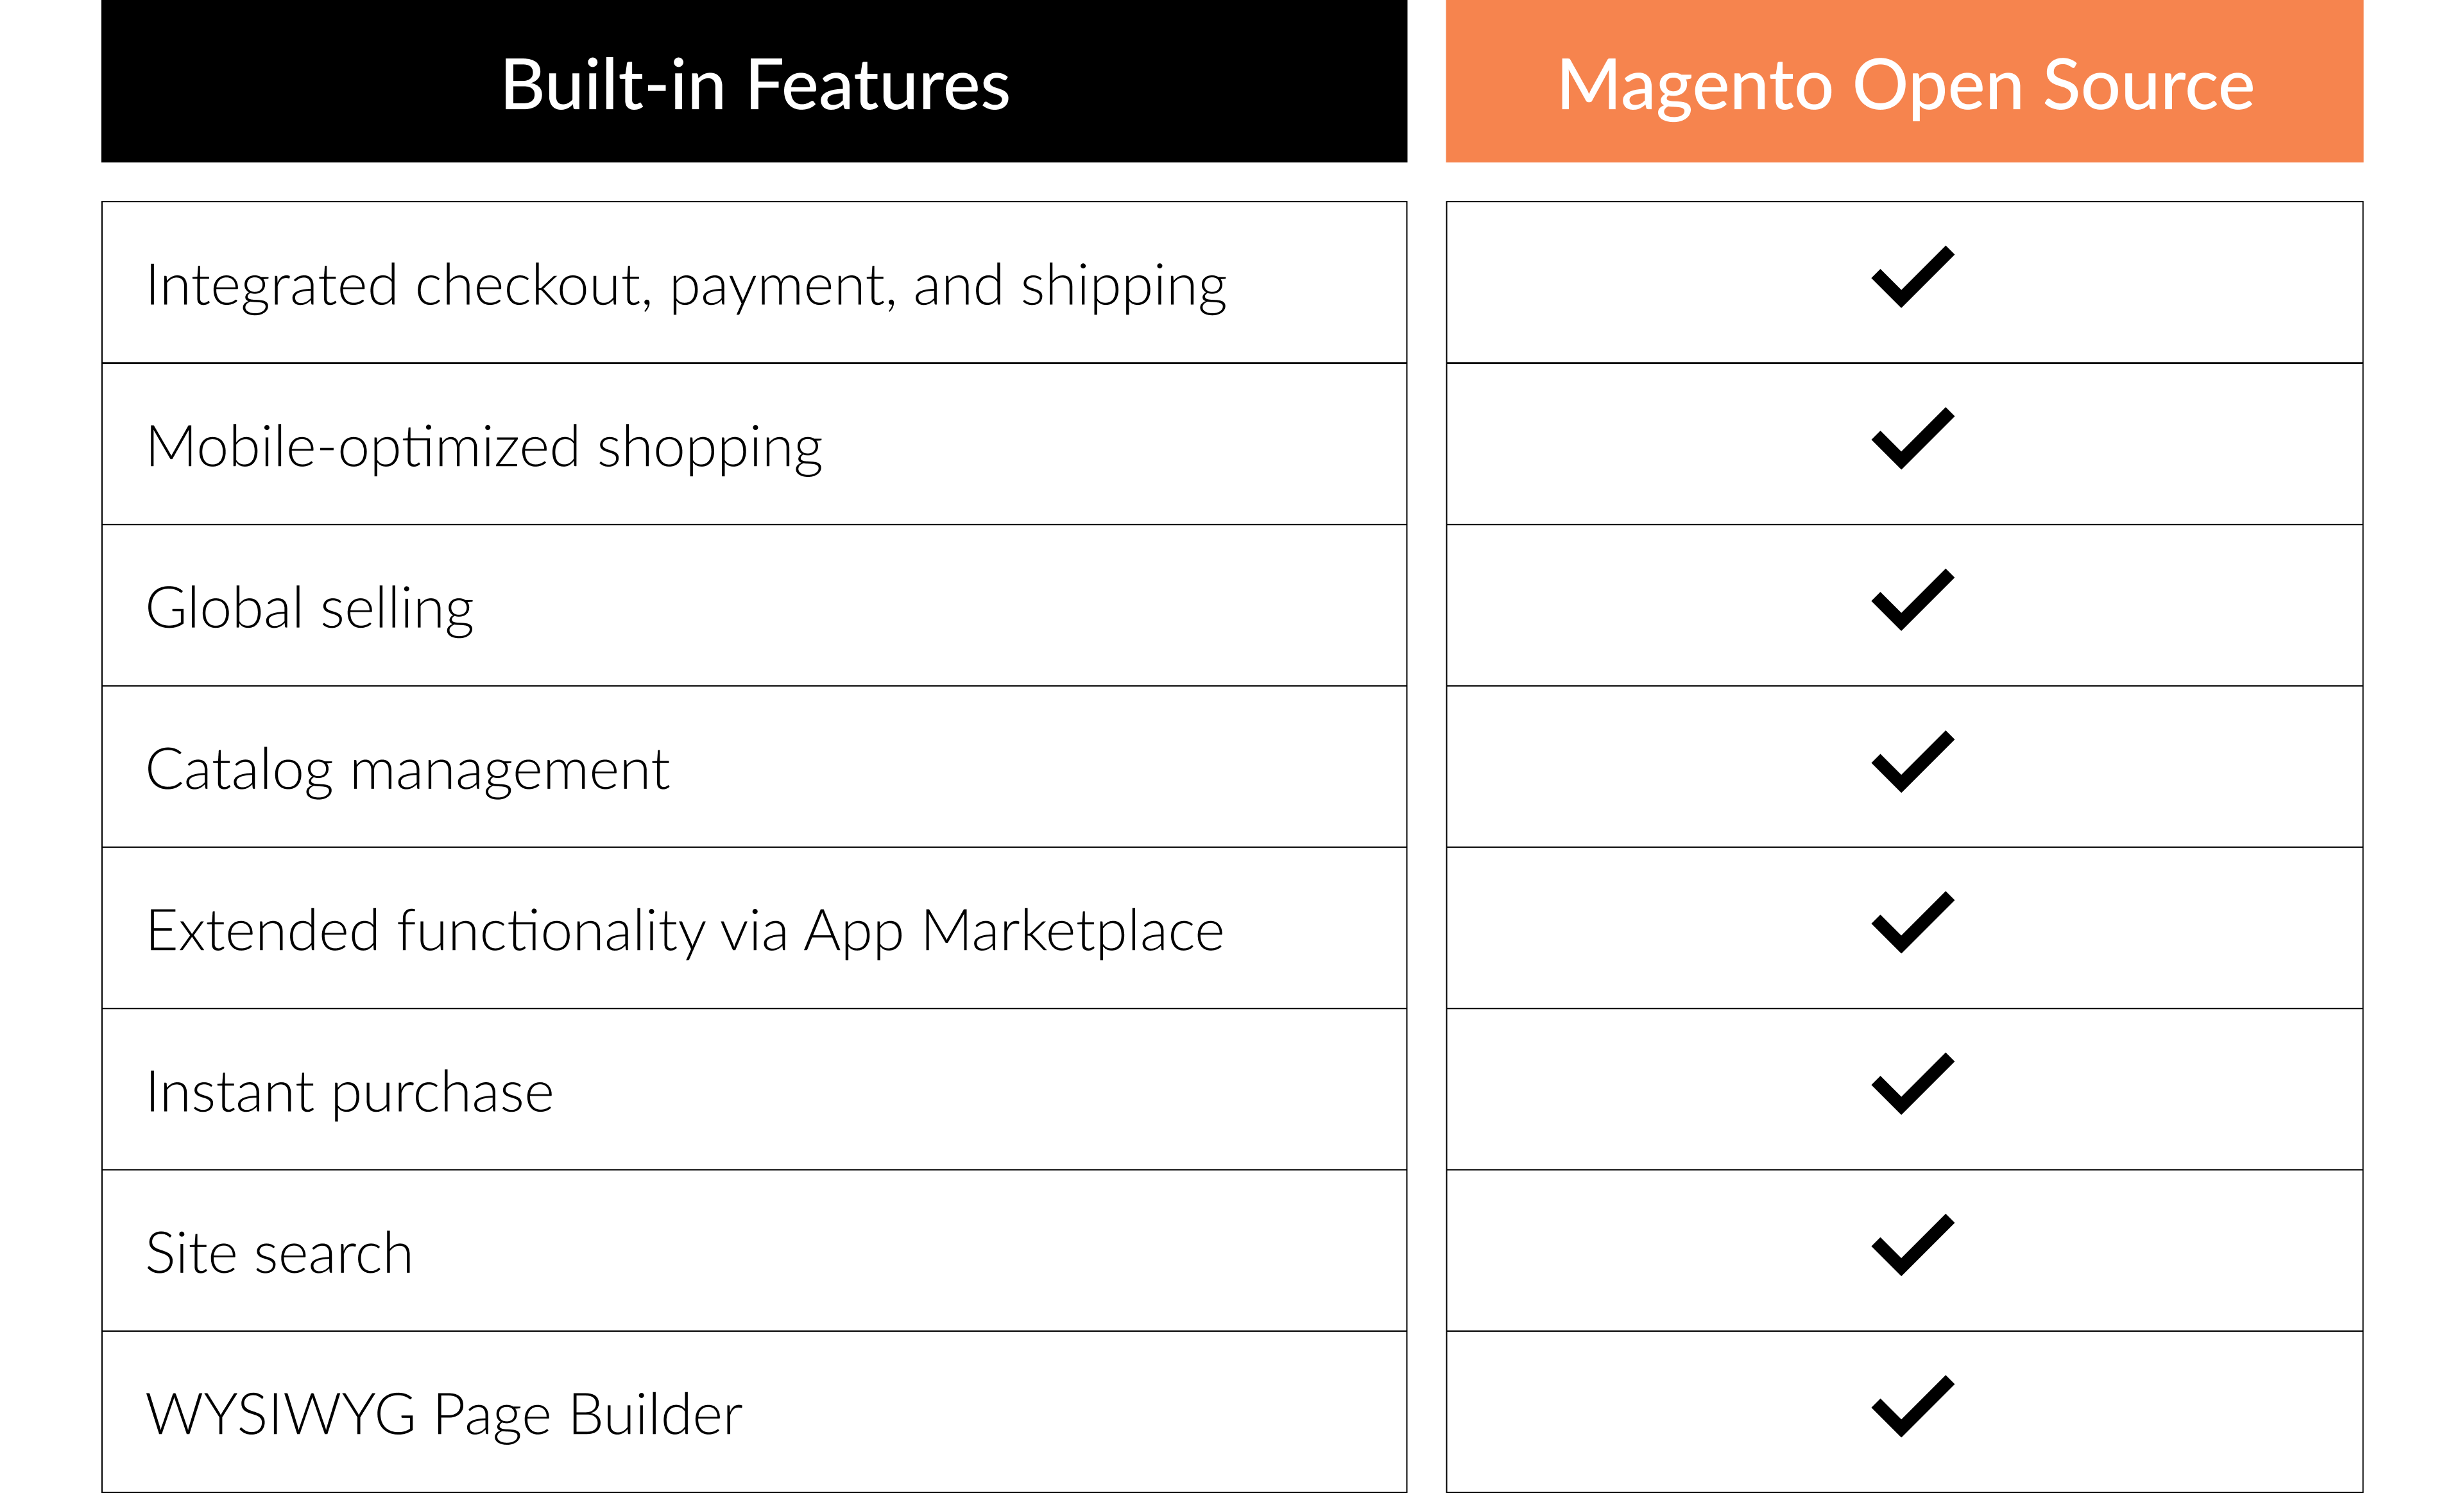 Magento Open Source covers all the basic eCommerce functionalities and more